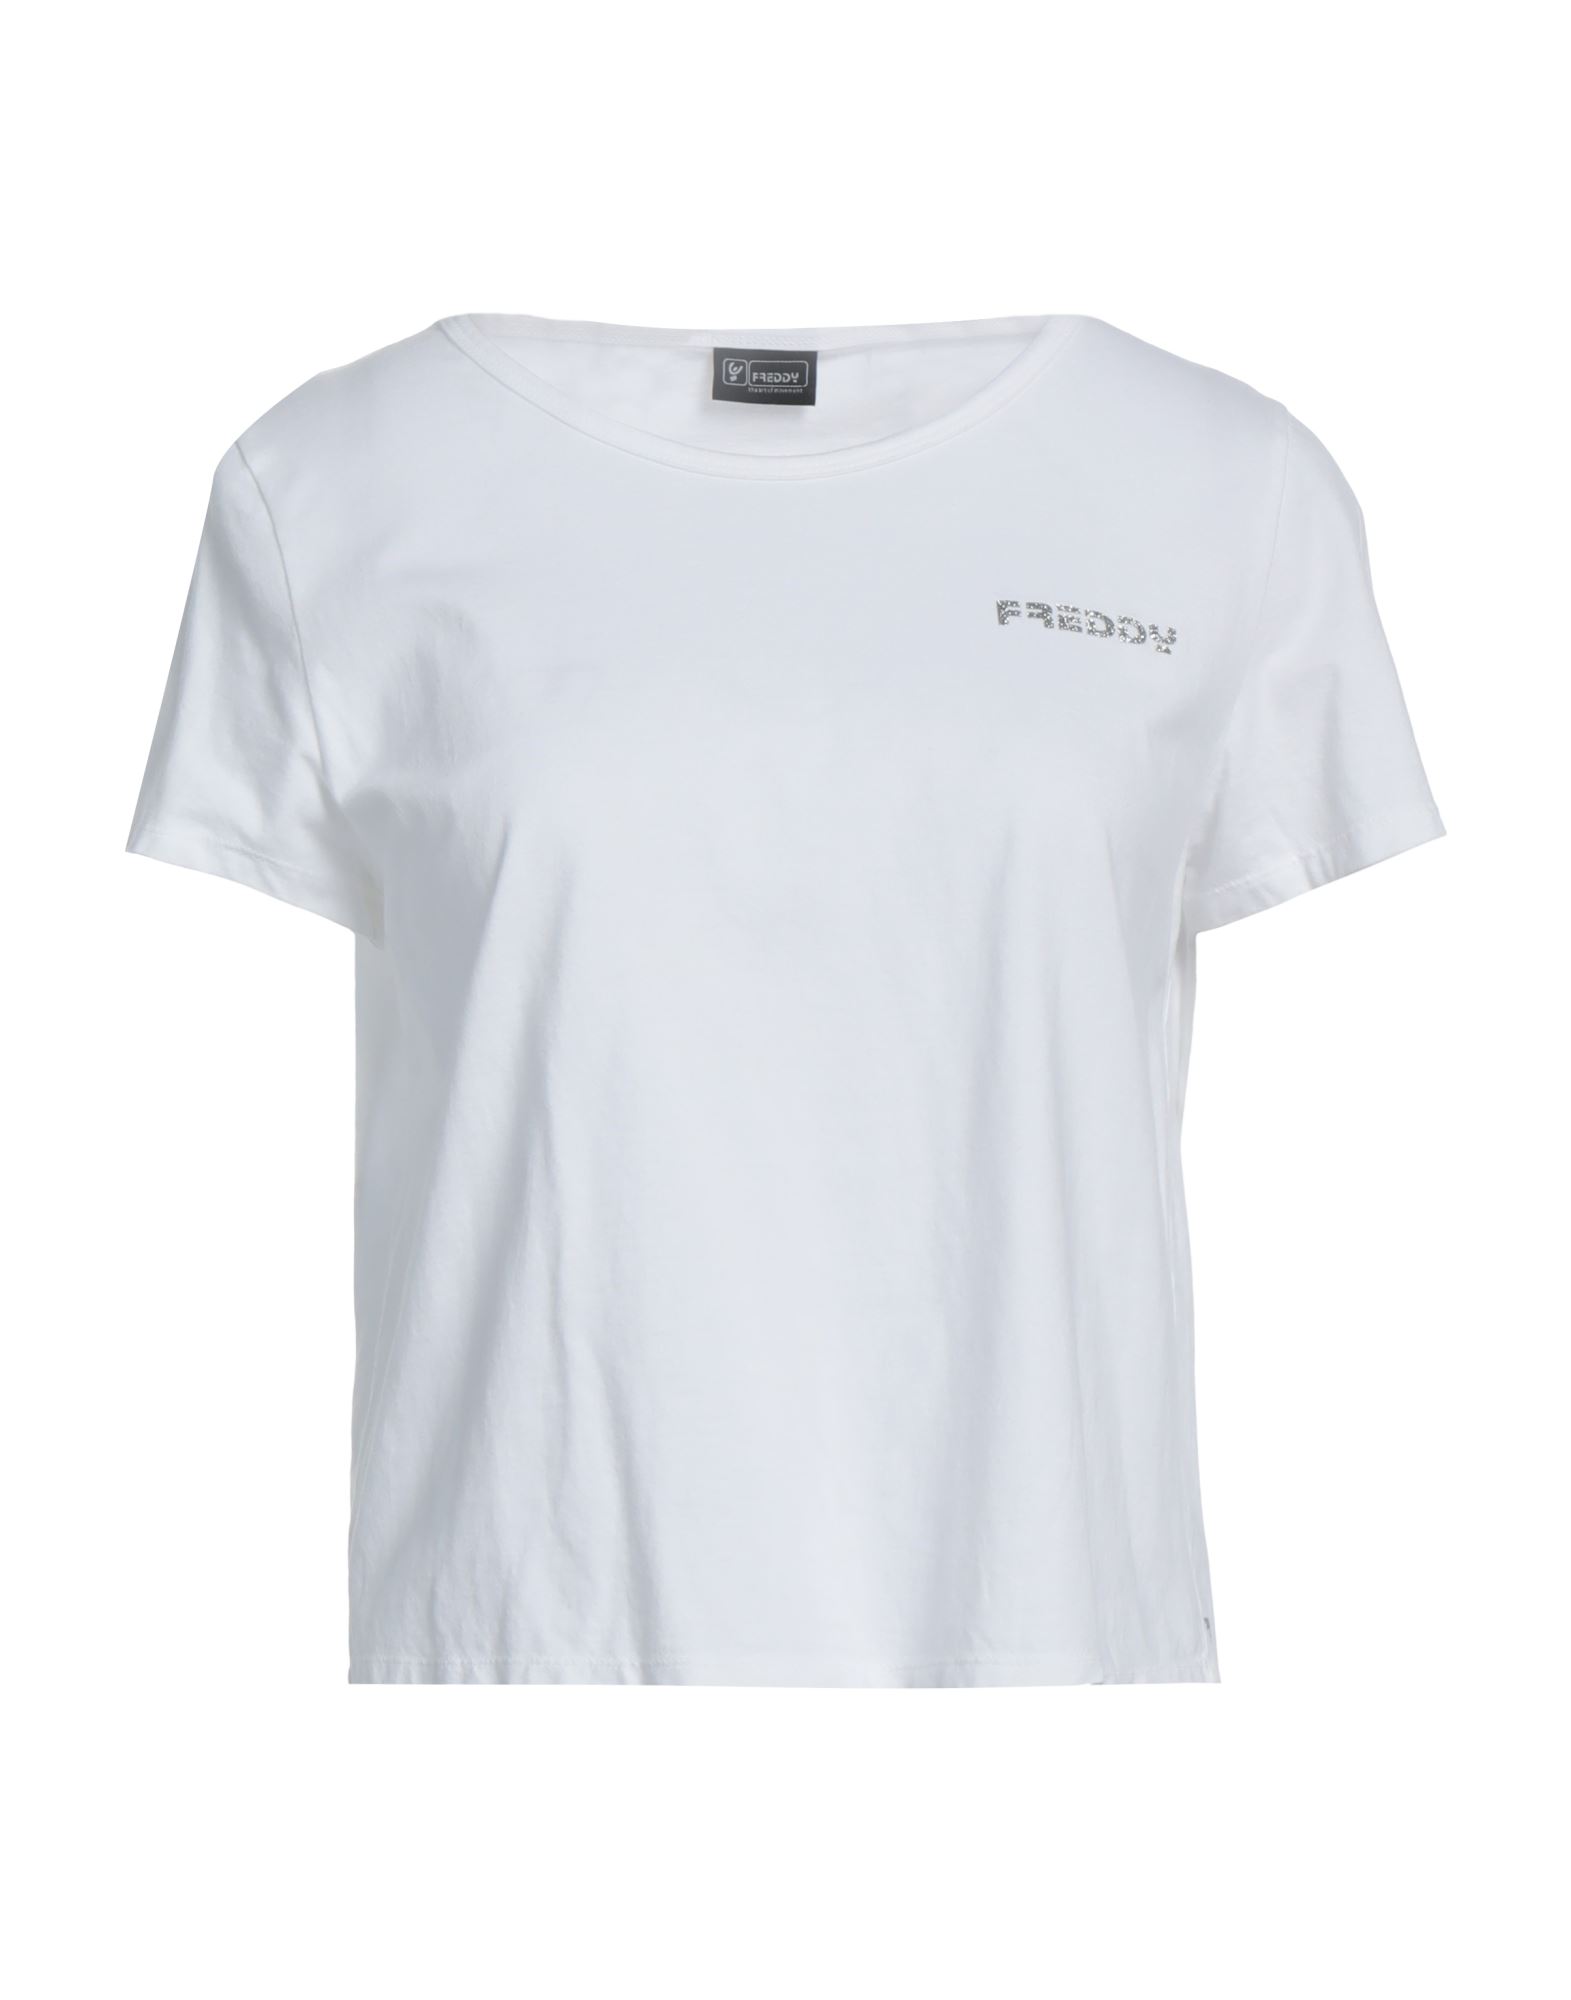 Freddy T-shirts In White